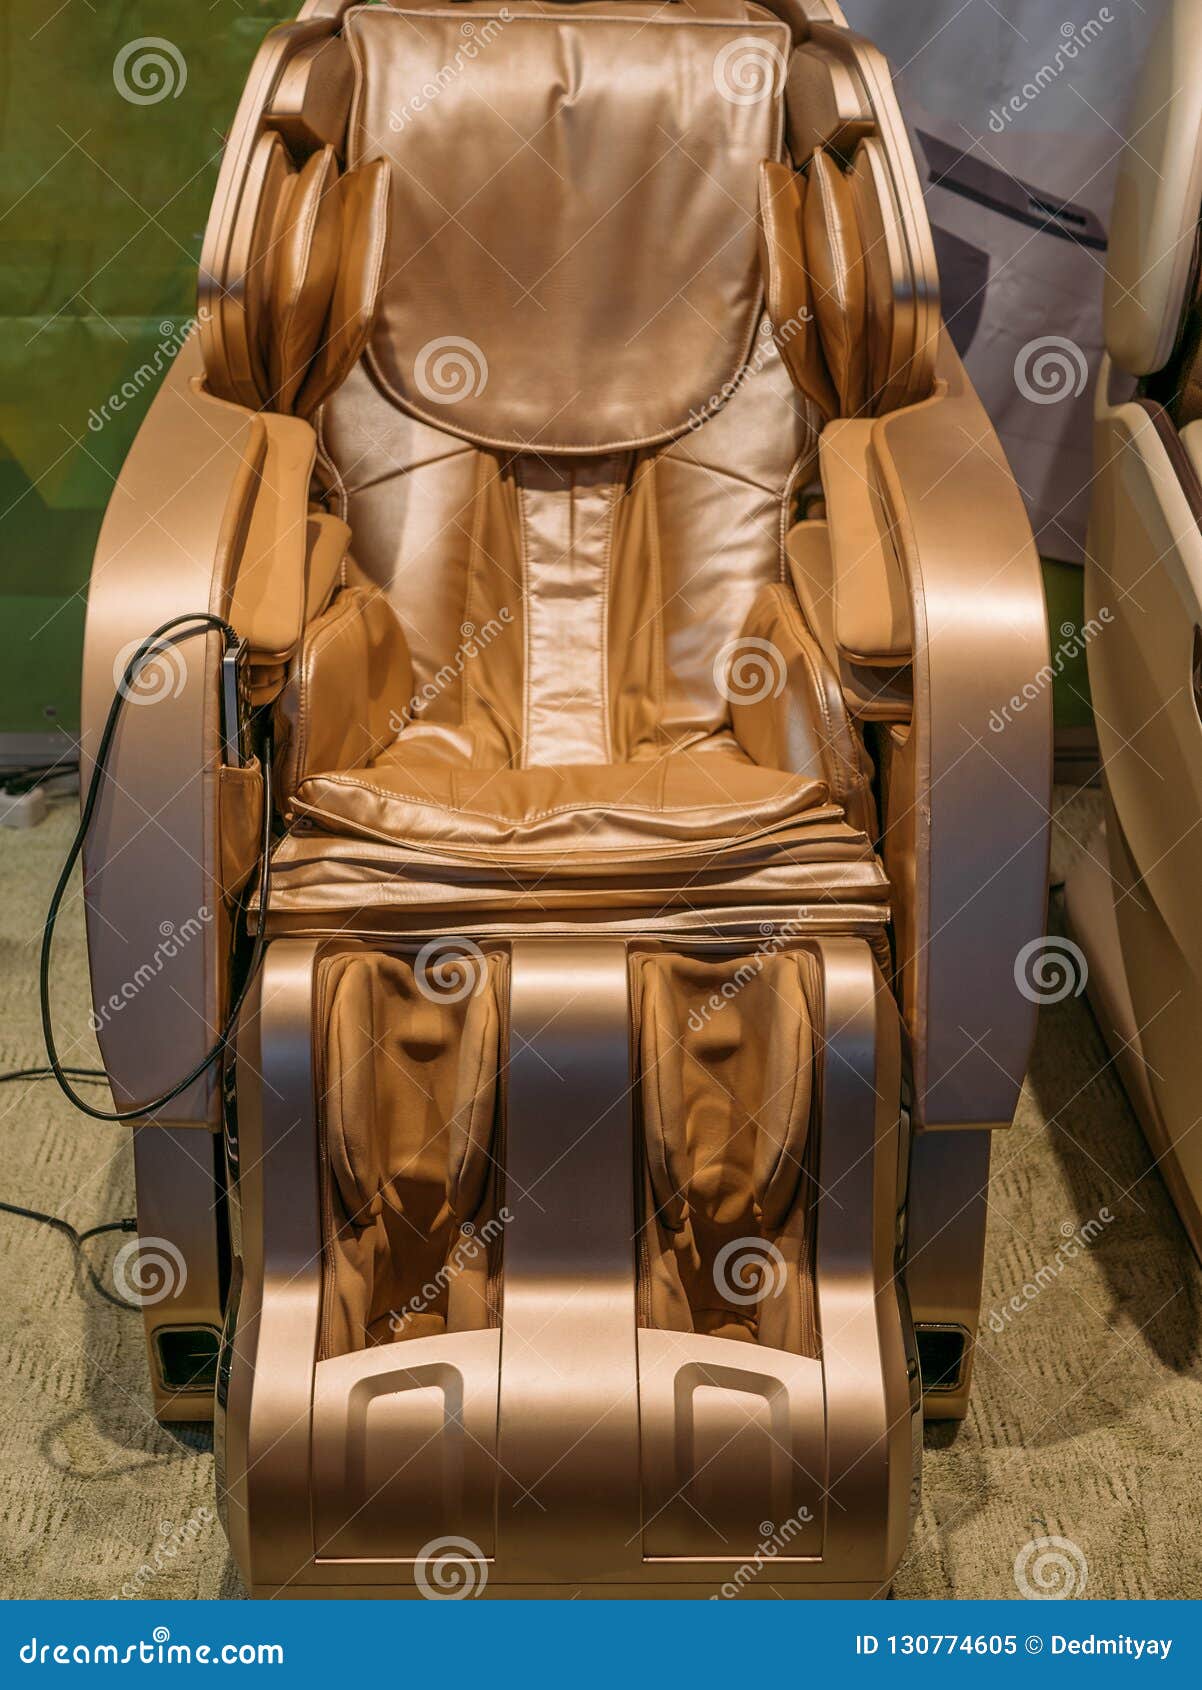 Modern Leather Comfortable Massage Chair For Relax After Stress